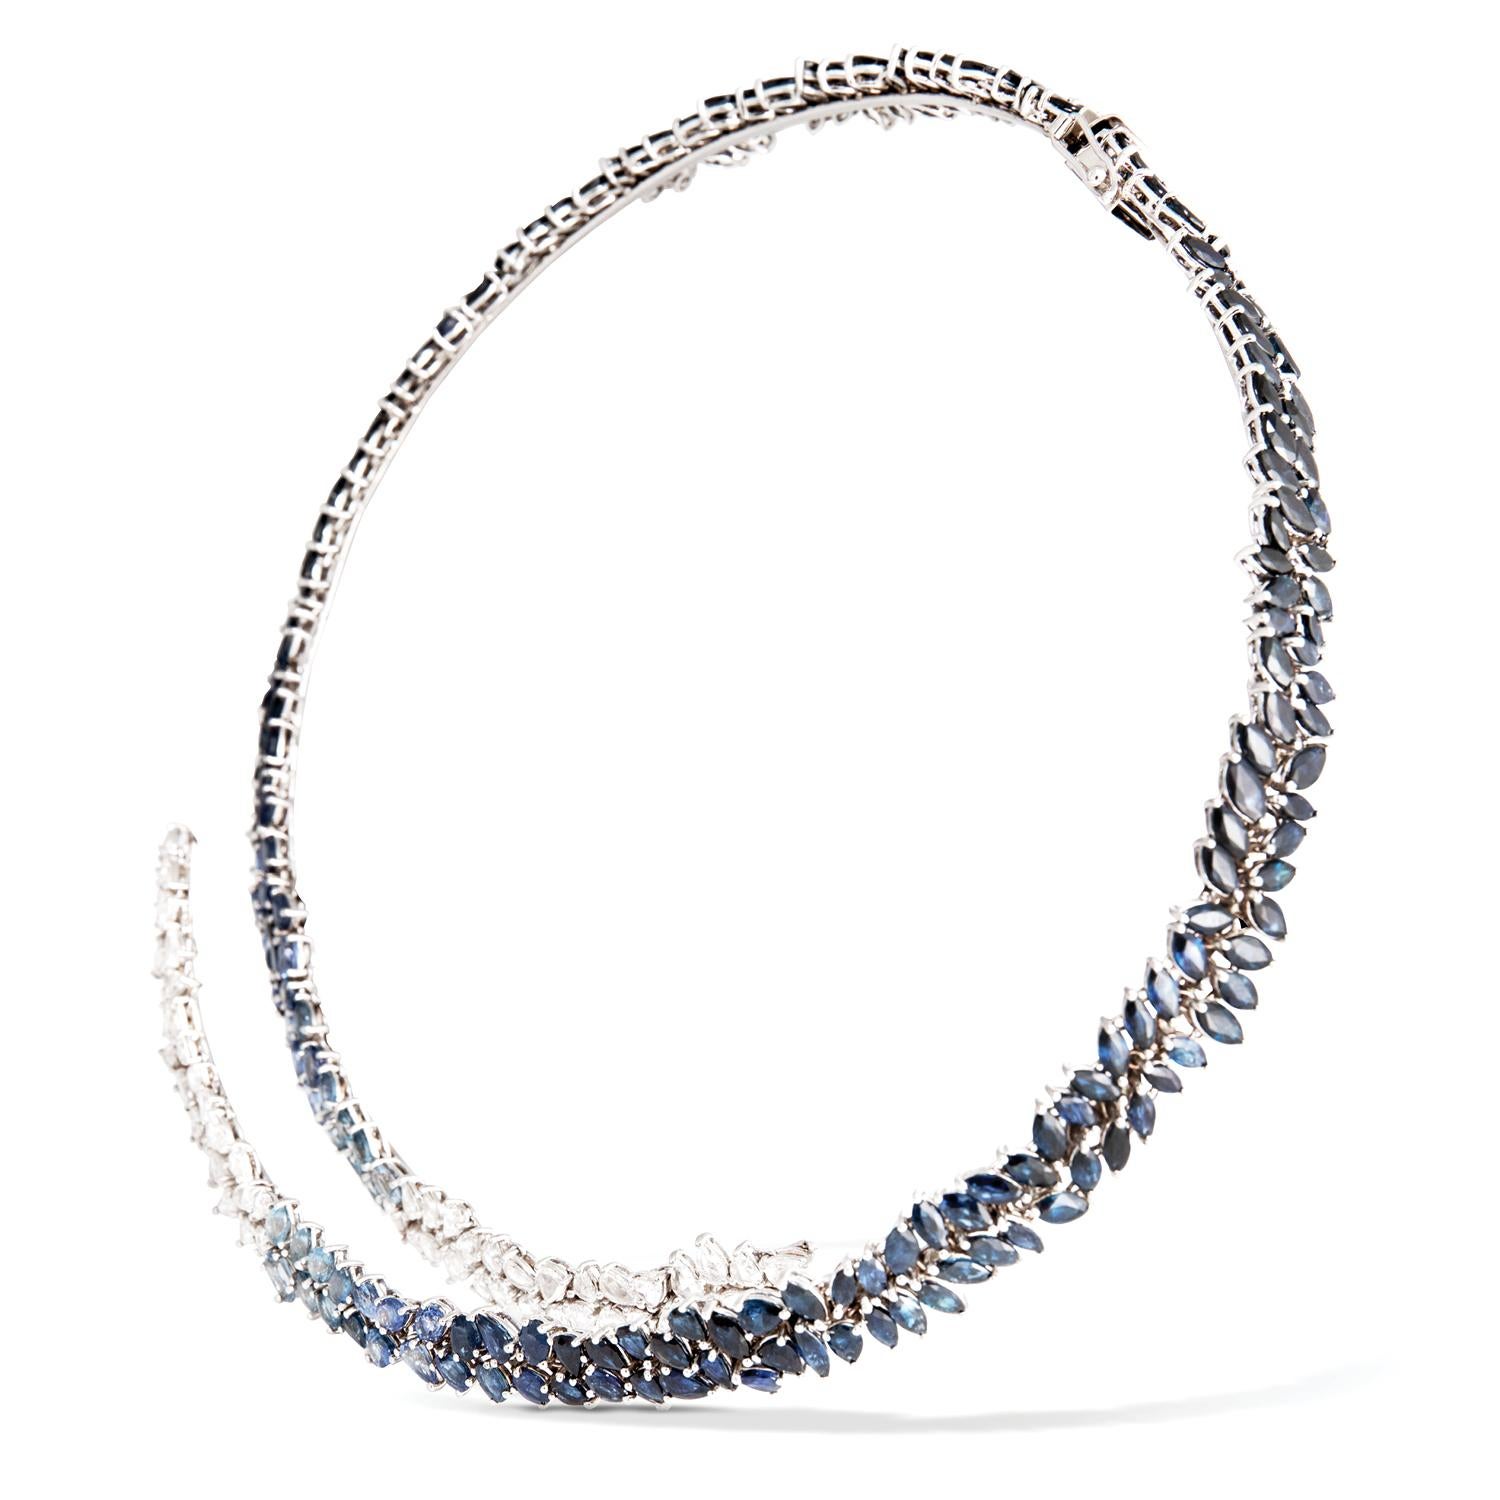 4.20 carat white rose cut diamond and 47.70 carat ombre blue sapphire open ellipse necklace, 18 carat recycled white gold, 51.90 TCW  - One-of-a-kind

This rare diamond and blue sapphire open ellipse necklace is comprised of a unique curation of